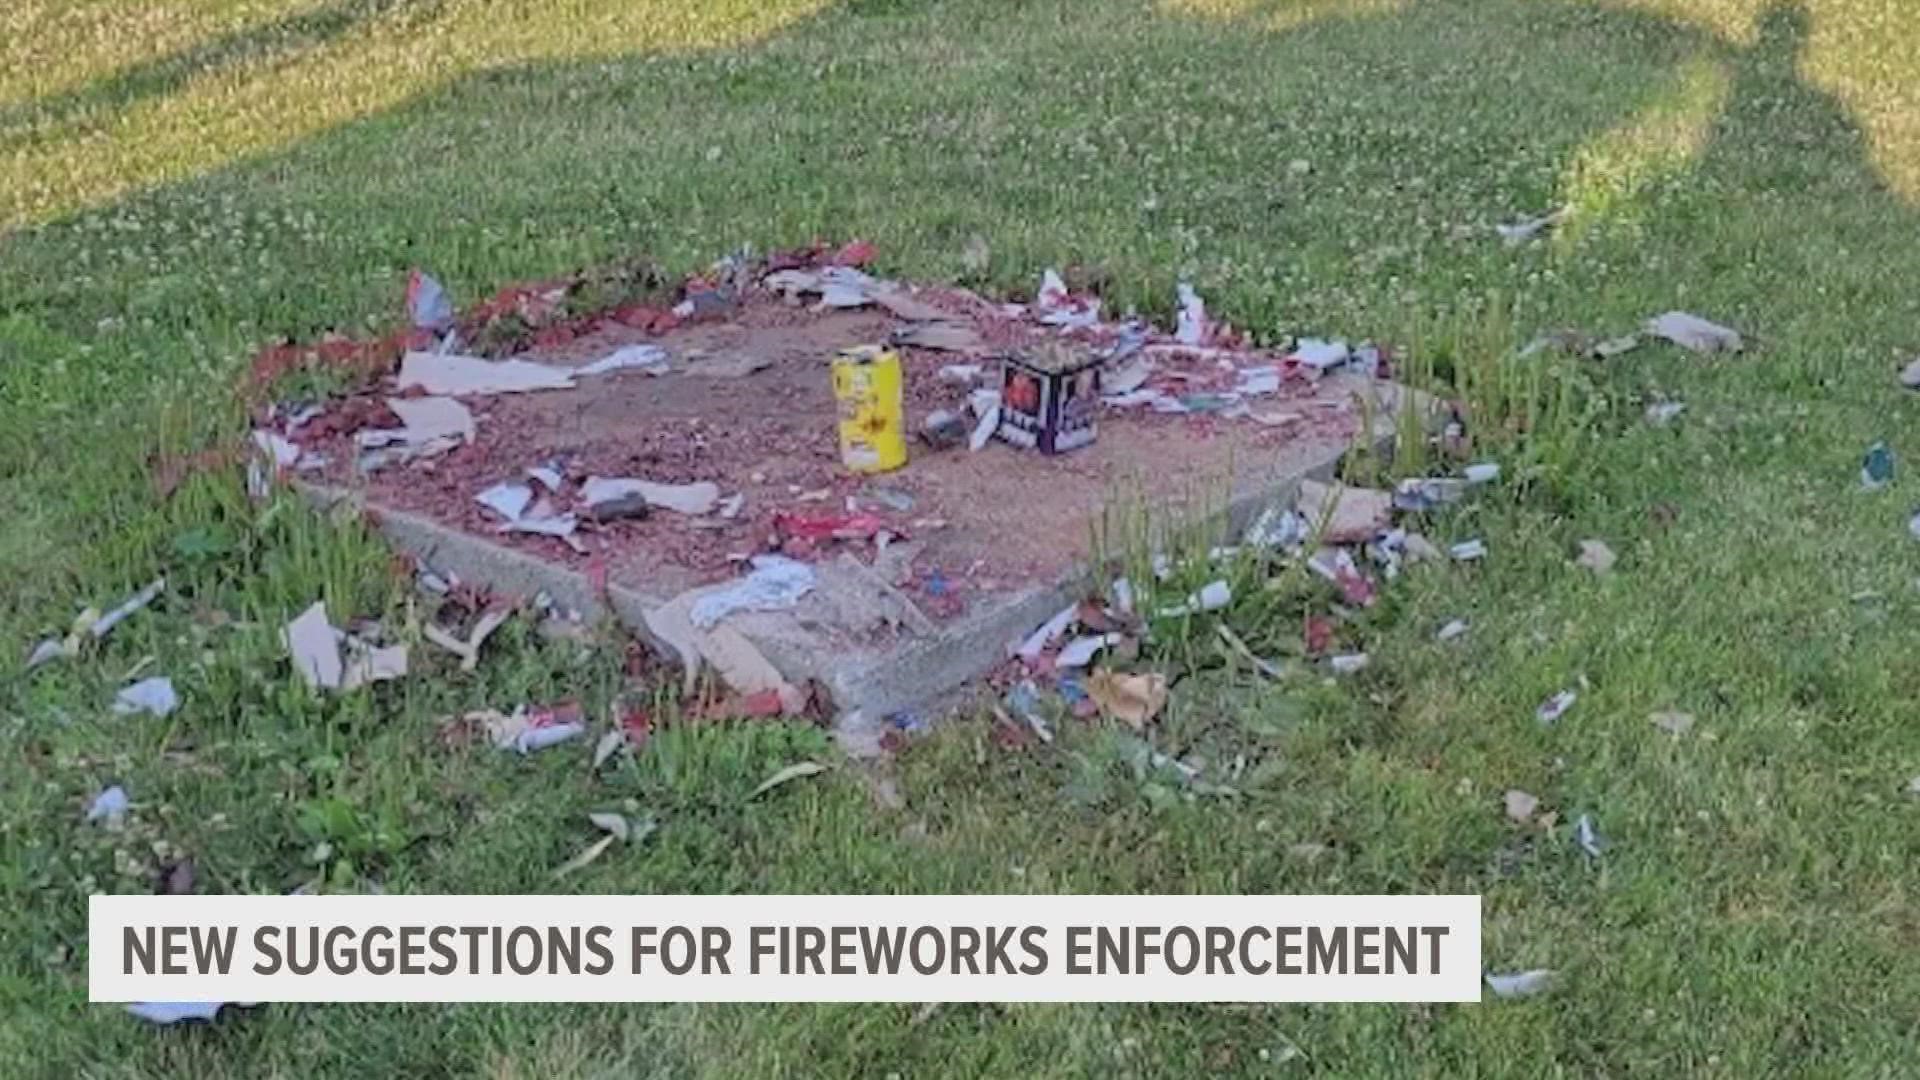 Des Moines city council member wants to look at new ways to enforce the city's fireworks ordinance.